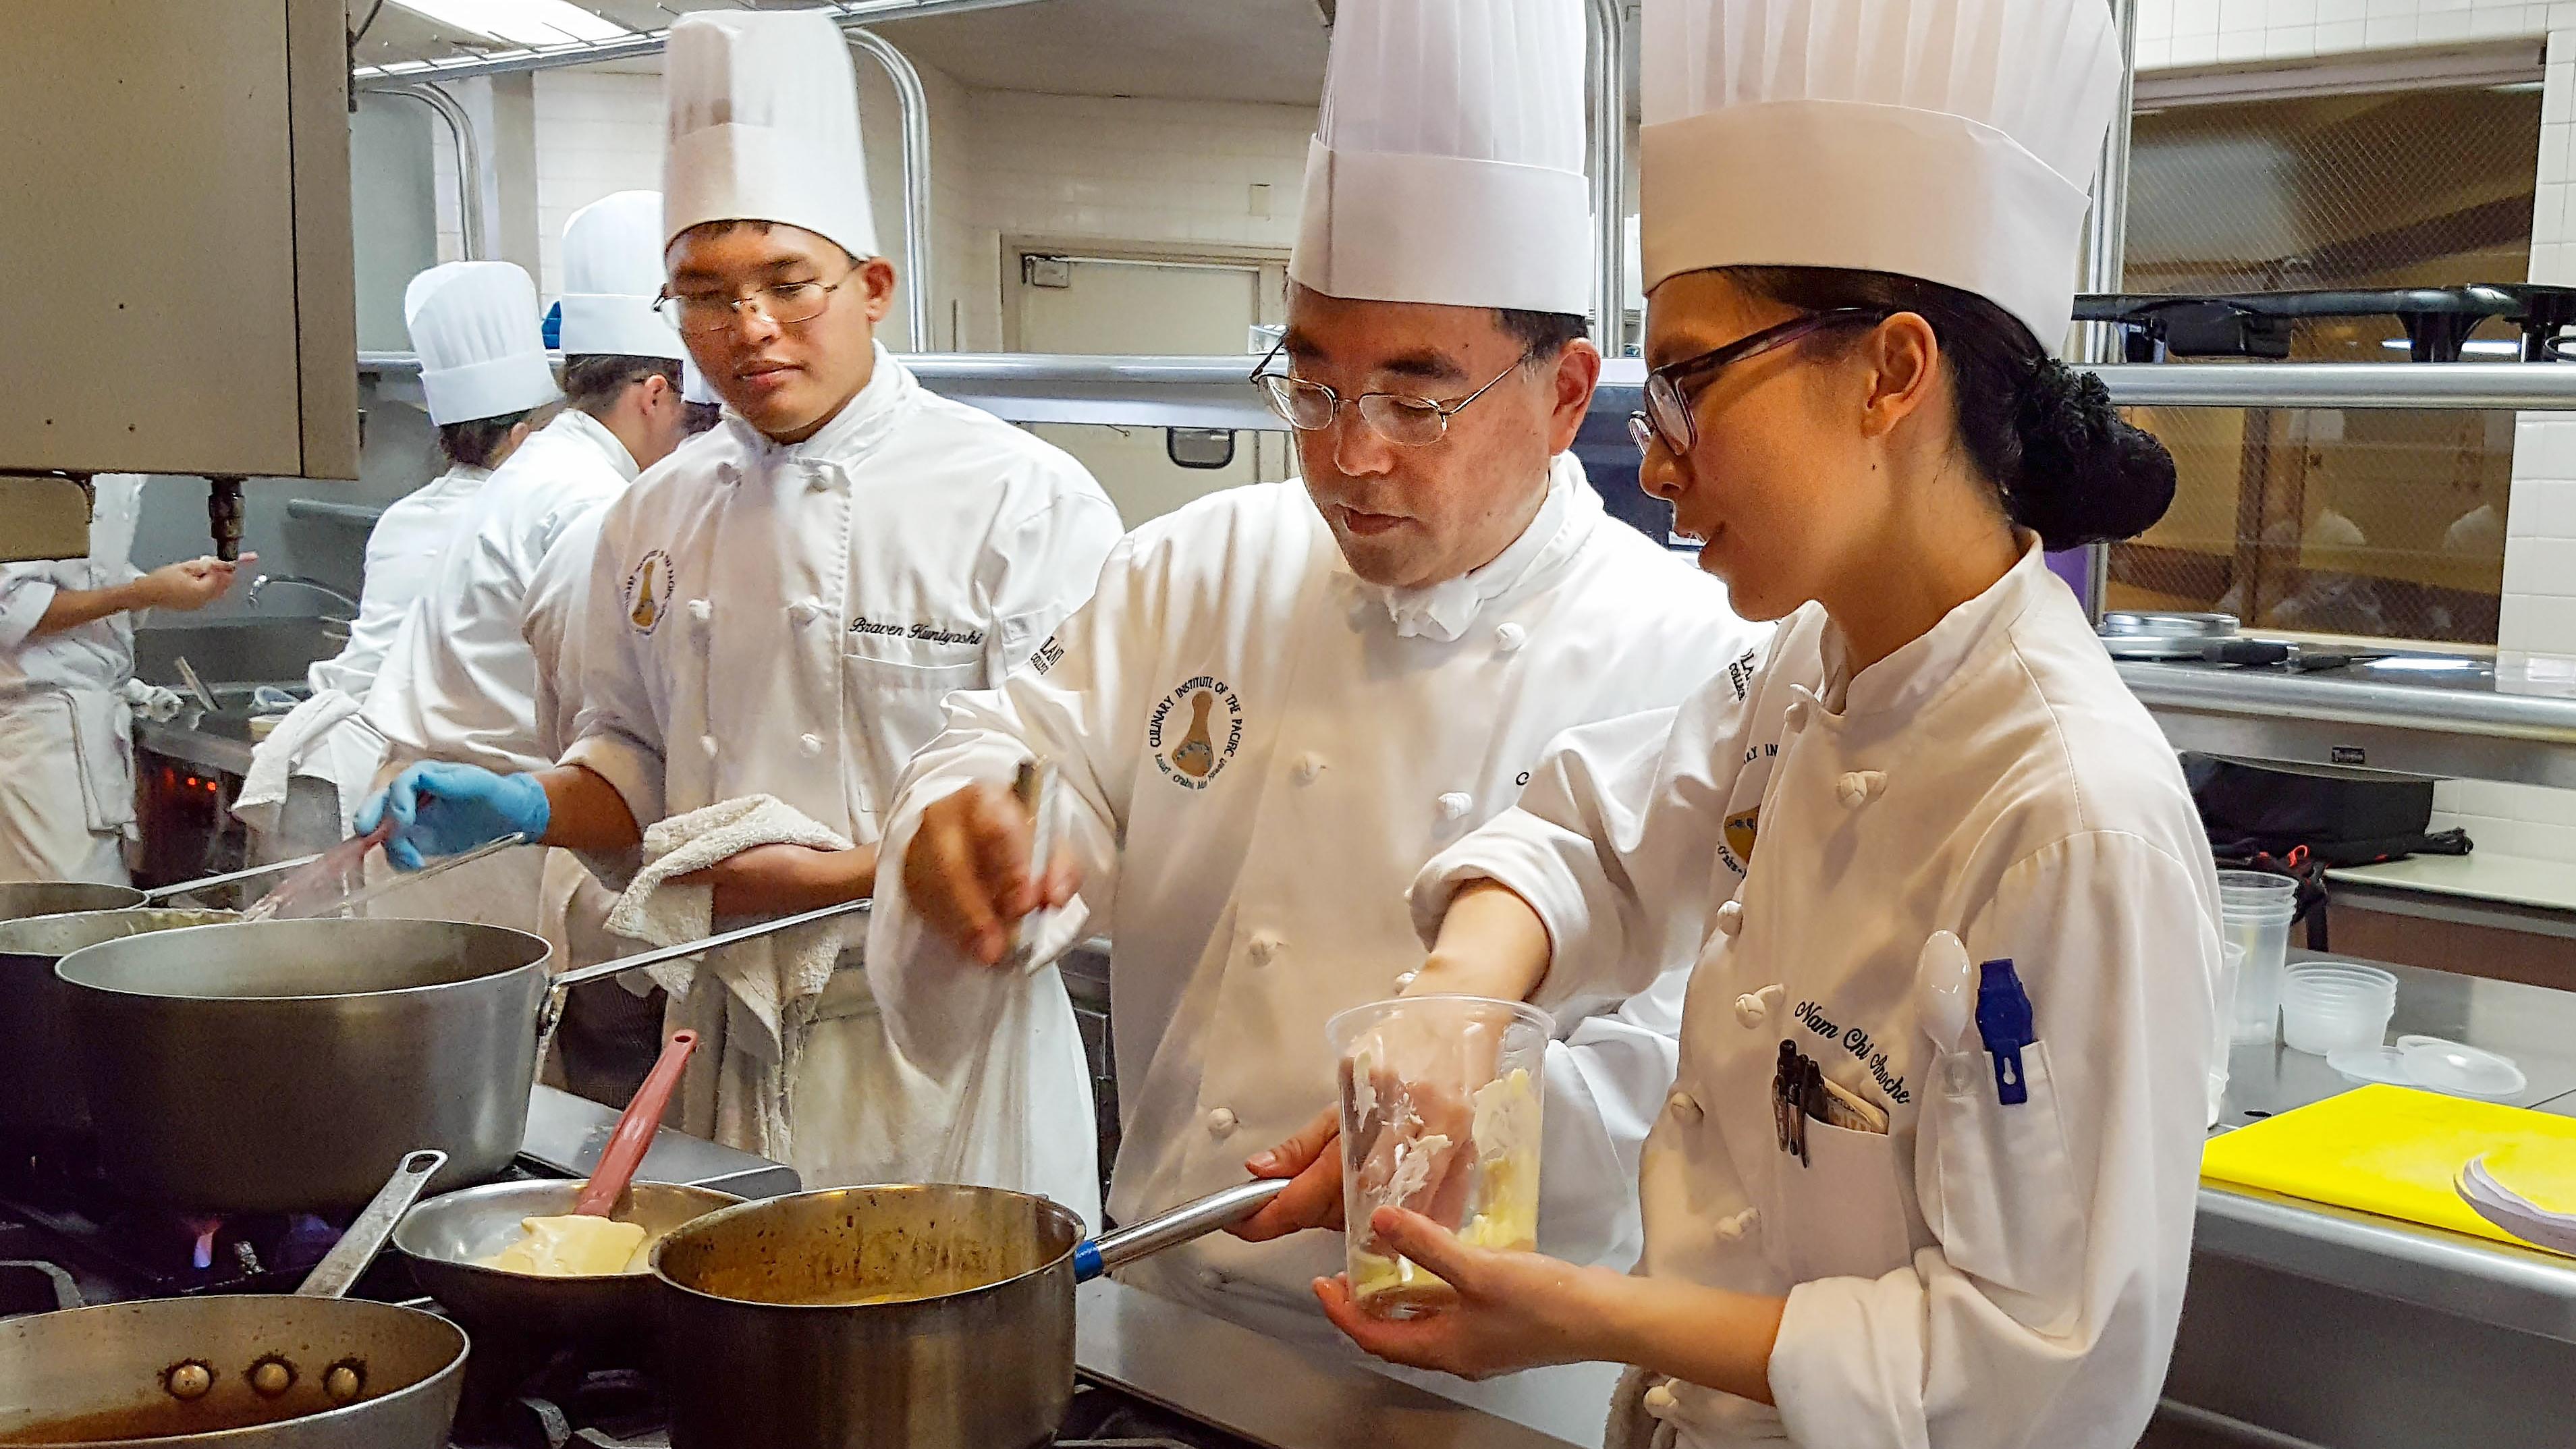 There’s still time to enroll your staff in KCC’s FREE Culinary and Restaurant Manager Training Programs!